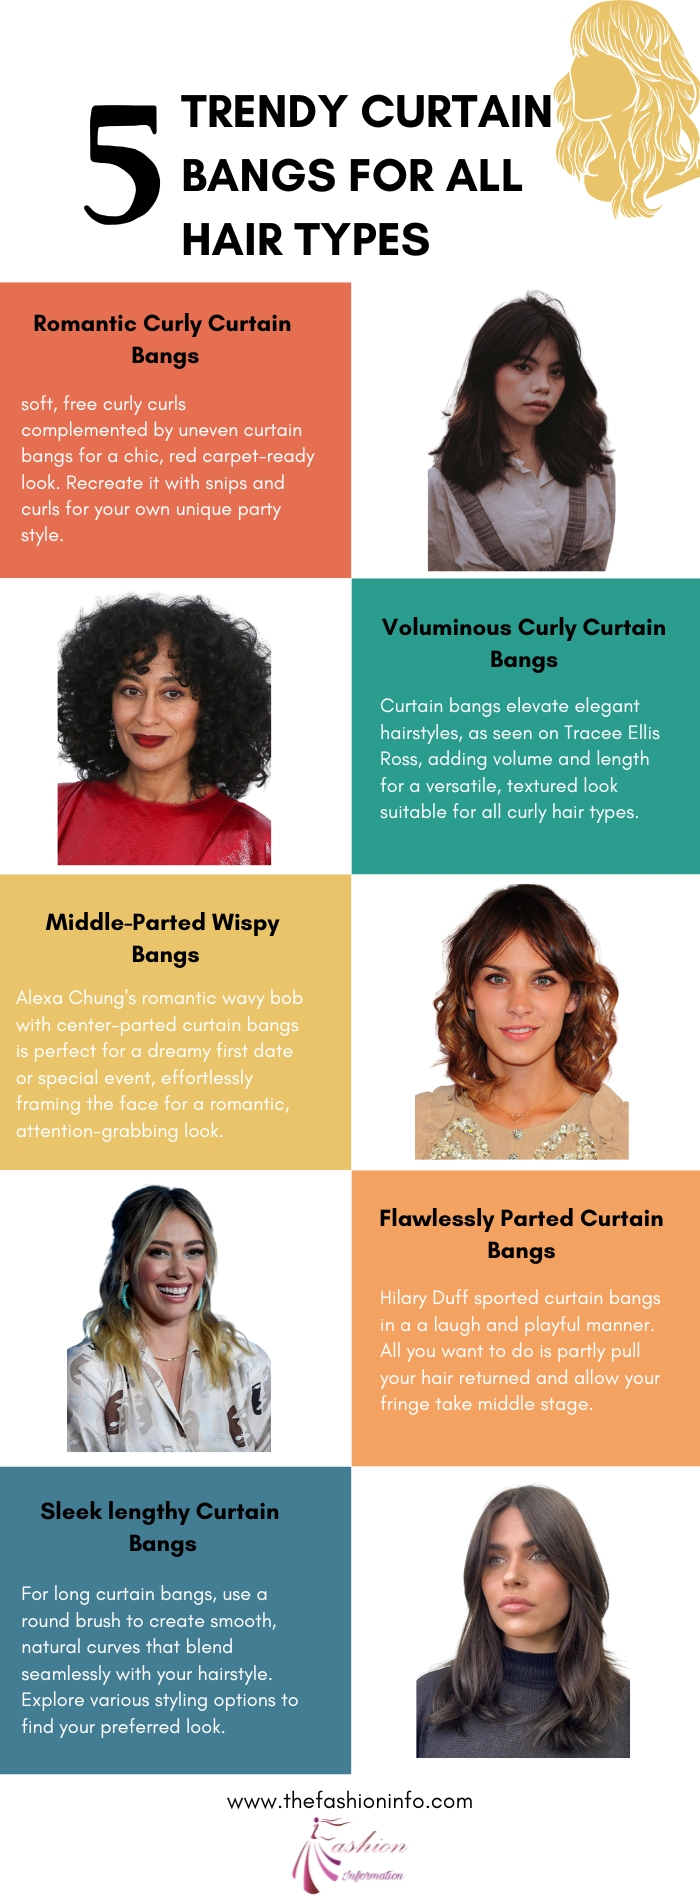 5 Trendy Curtain Bangs For All Hair Types